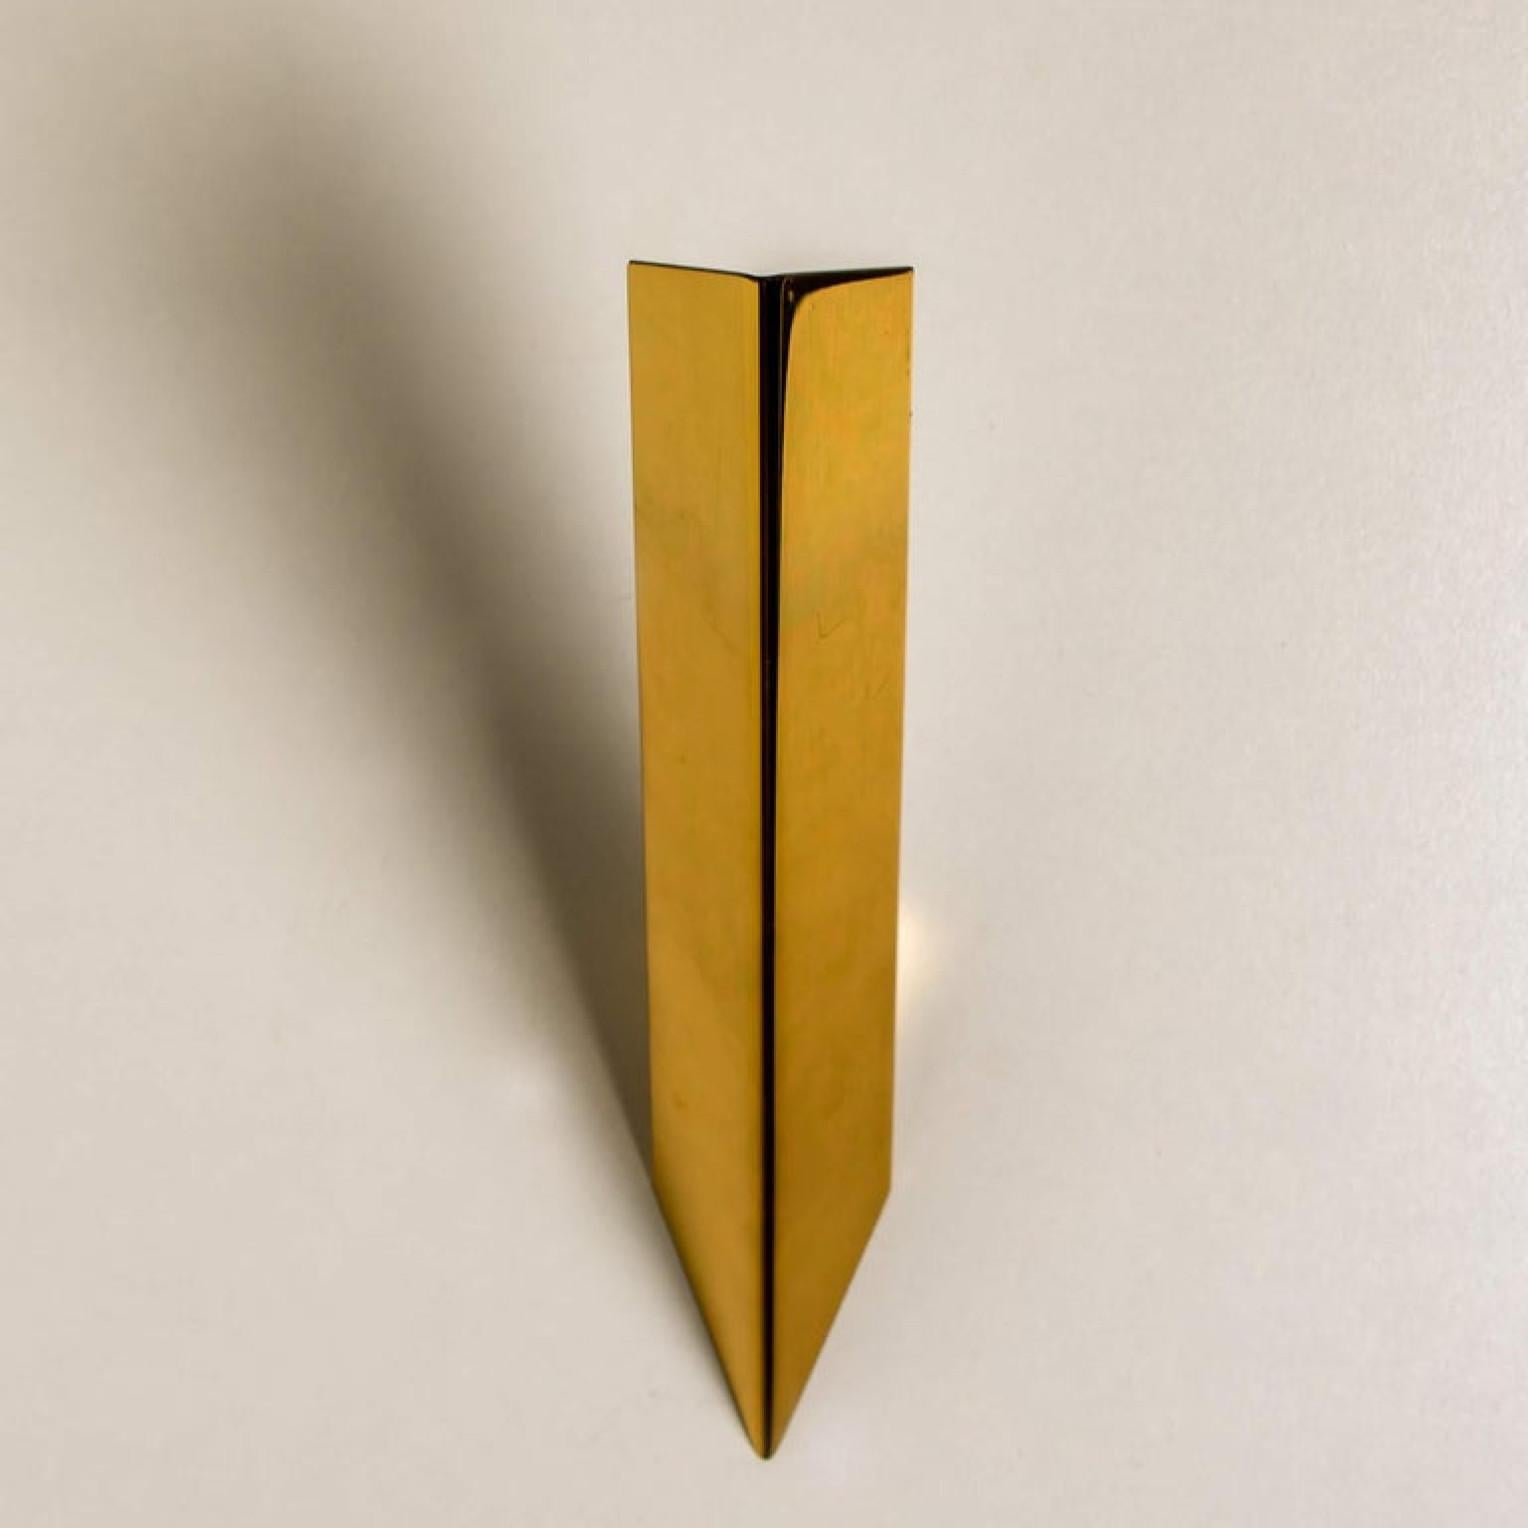 1 of the 2 Pair of Wedge-Shaped High End Wall Lights by J.T. Kalmar, 1970s For Sale 2